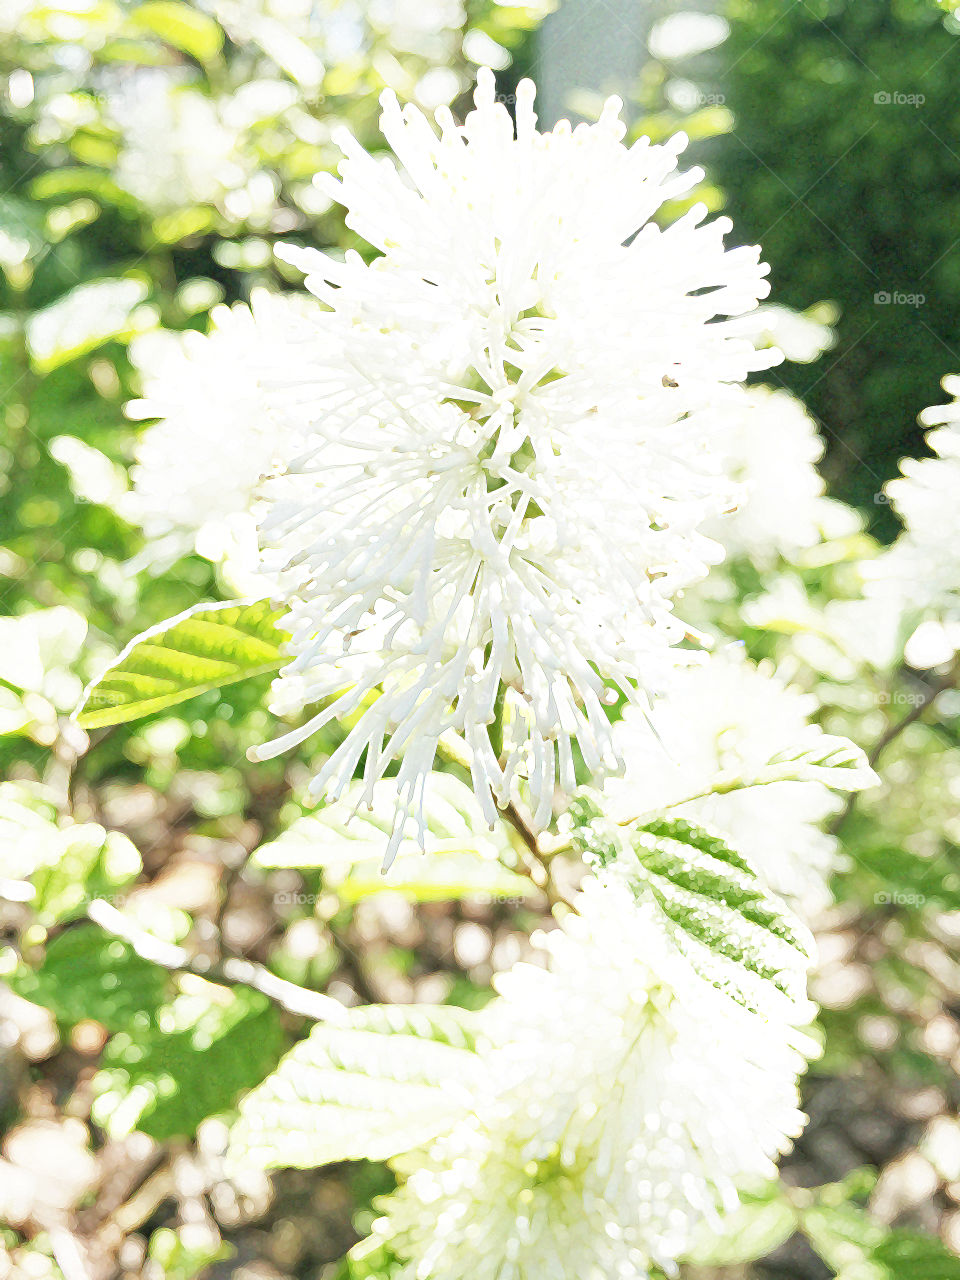 The white flowers of Fothergilla major, also known as mountain witchalder, with greater exposure.